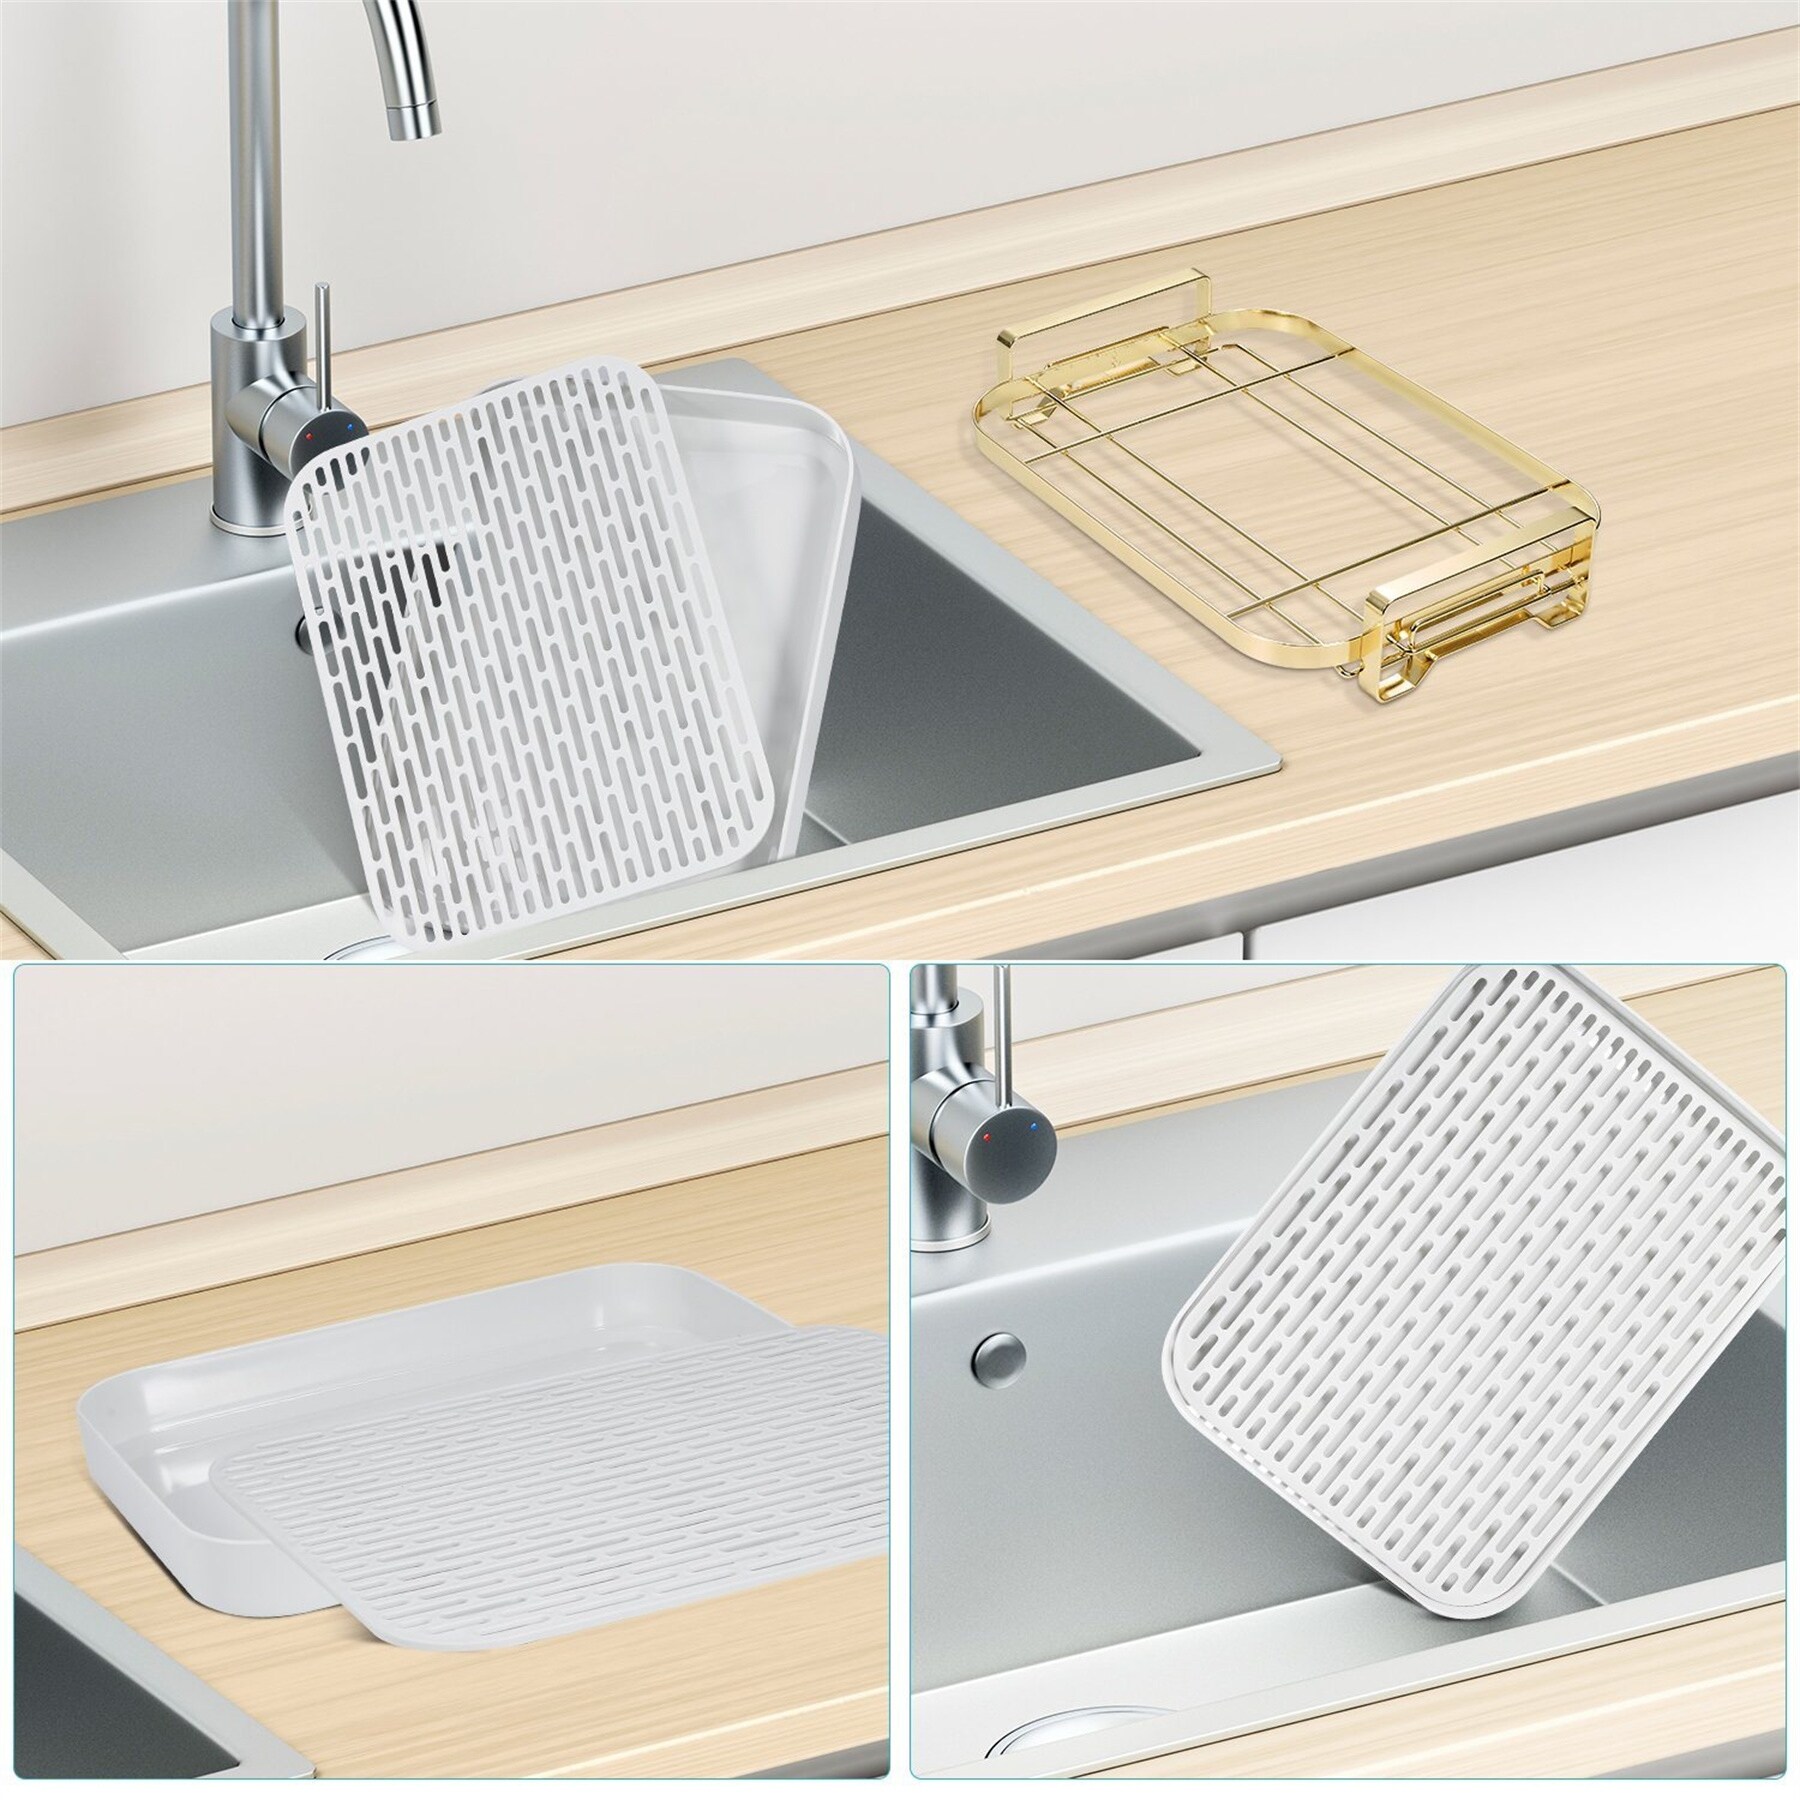 https://ak1.ostkcdn.com/images/products/is/images/direct/4f01fa568e69a7f808ea8e7ed1113dd2850af59e/Kitchen-Sink-Tray%2C-Bowl-Cup-Dish-Drying-Rack.jpg